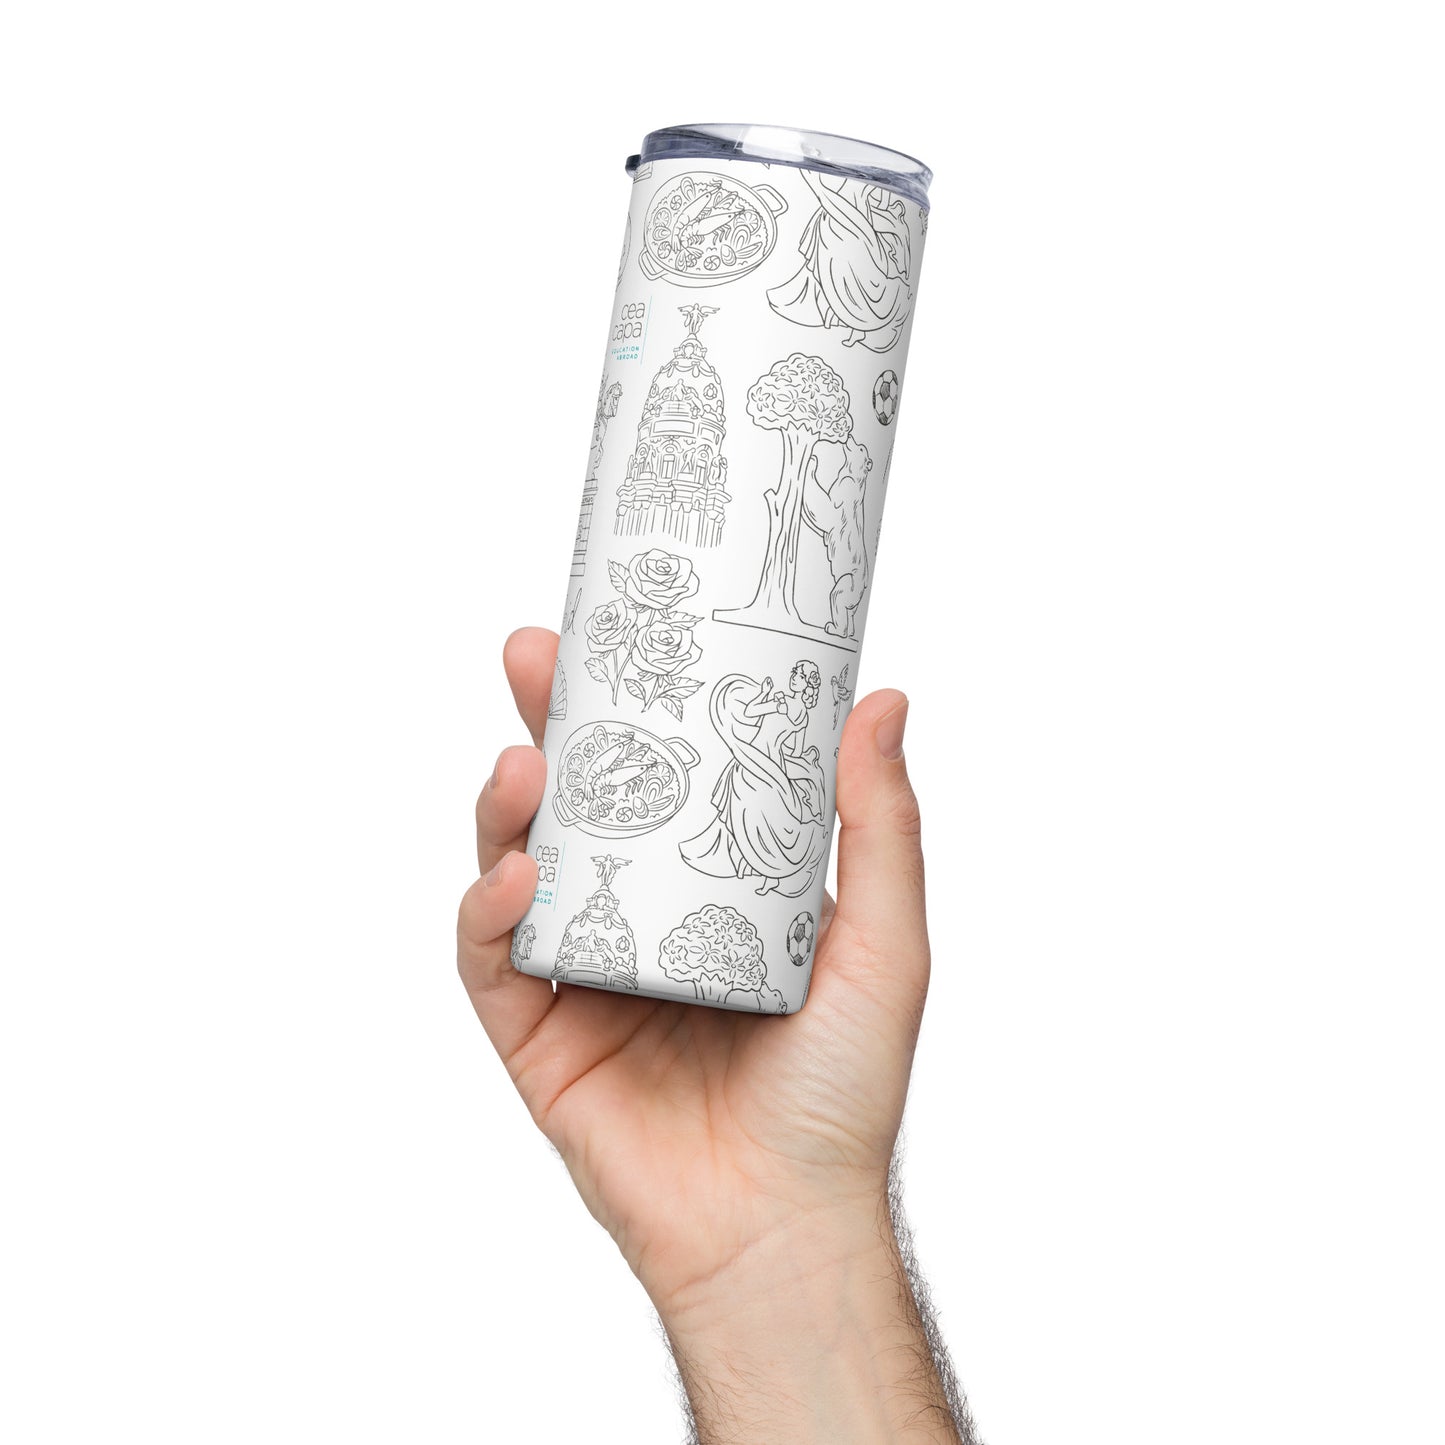 Madrid Icons Stainless Steel Tumbler